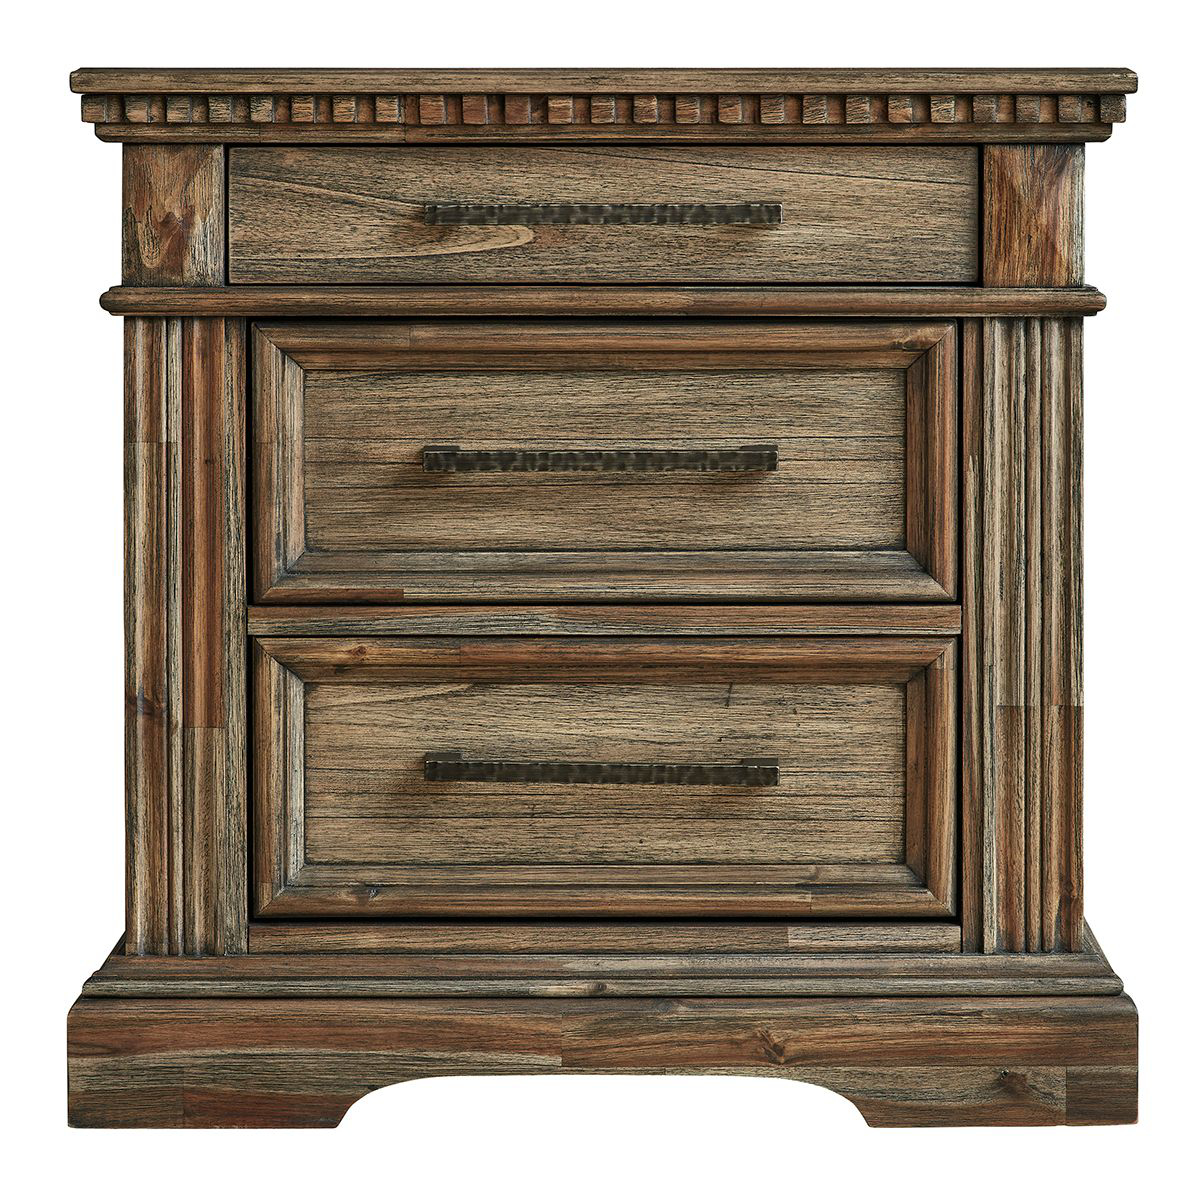 Picture of CORTE MADERA NIGHTSTAND